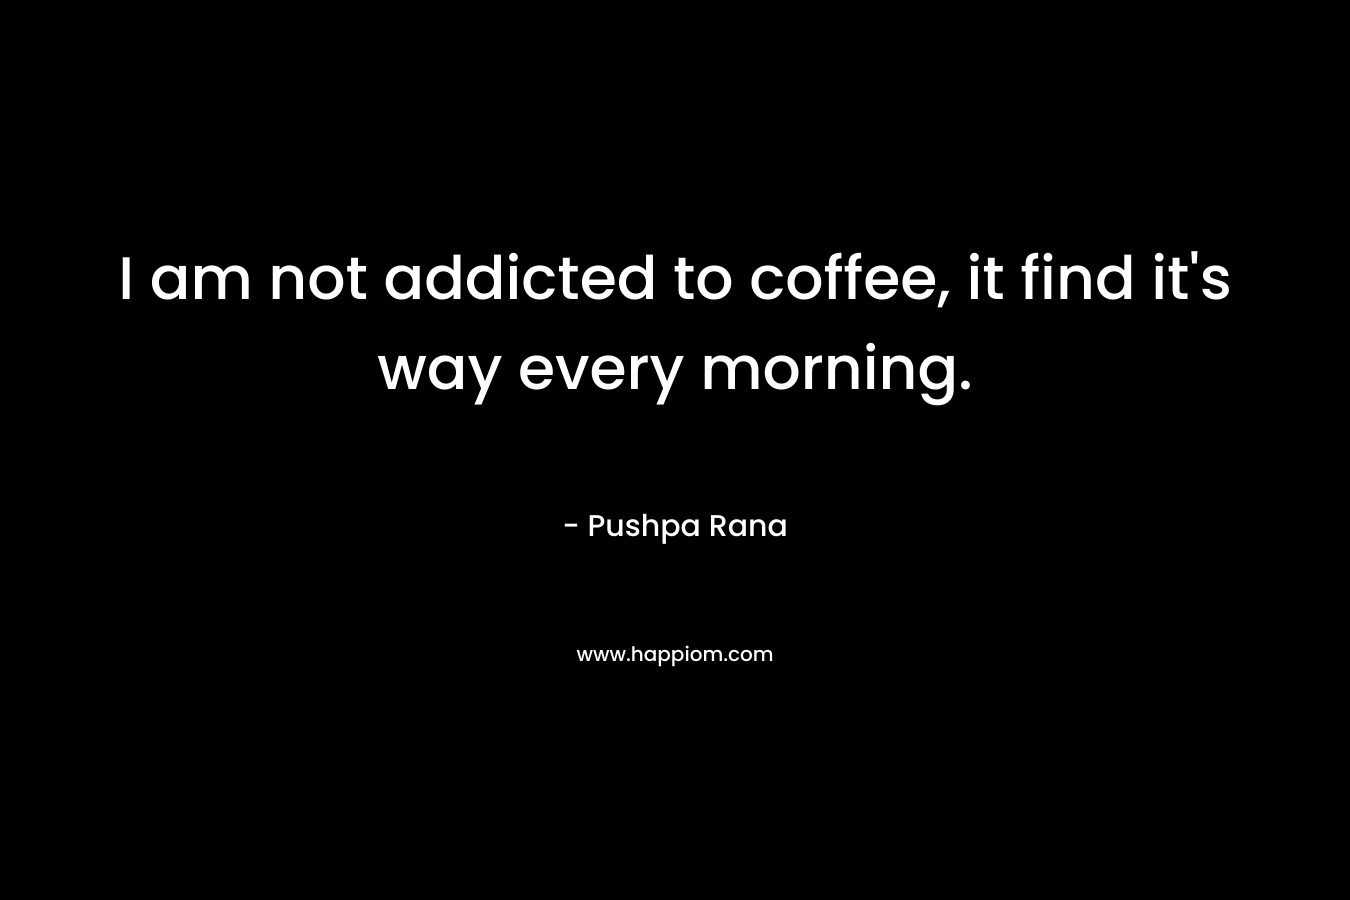 I am not addicted to coffee, it find it’s way every morning. – Pushpa Rana